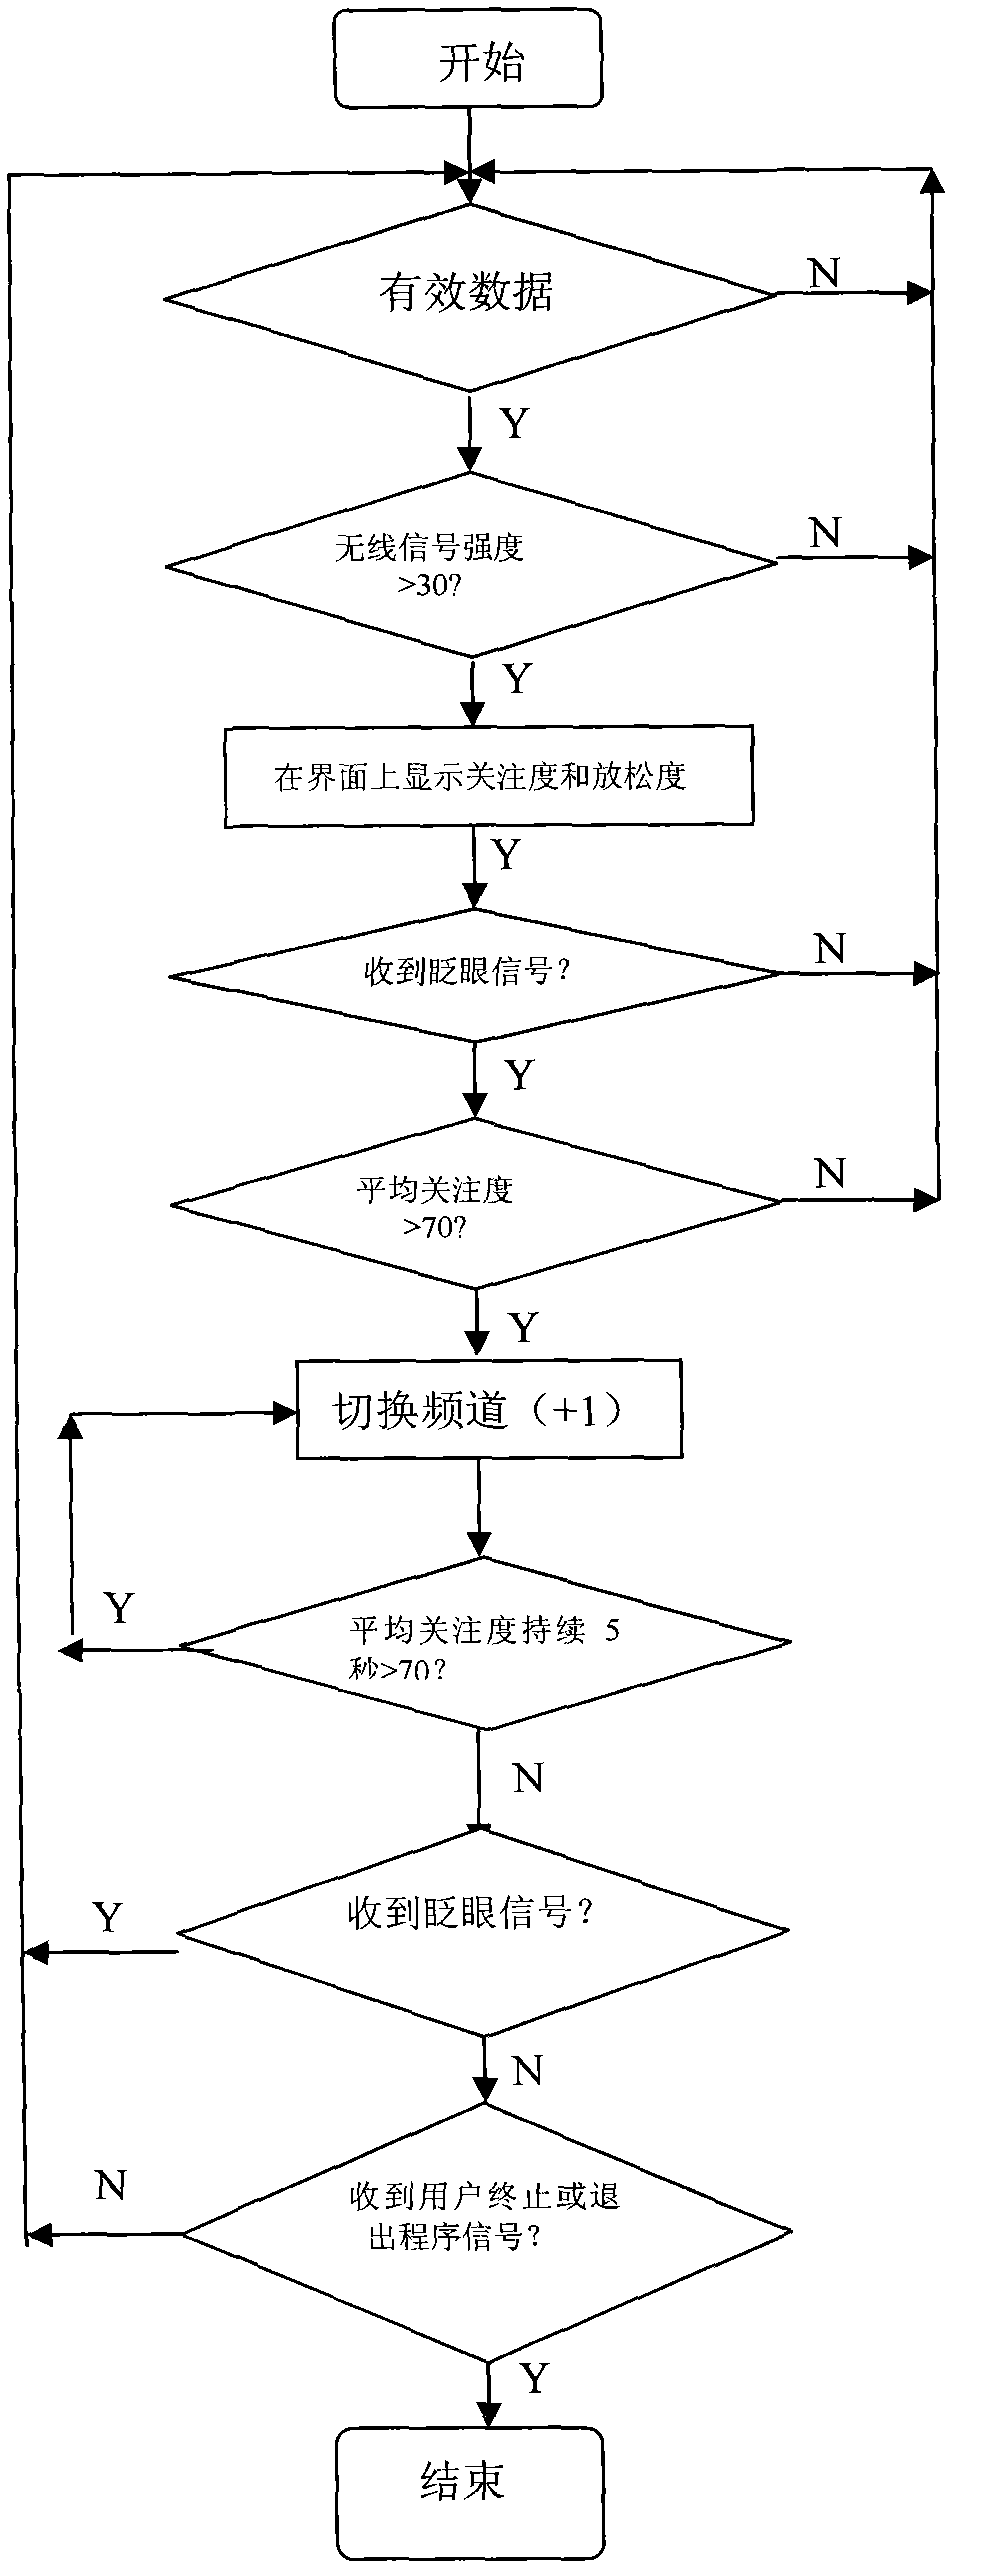 System for controlling electronic equipment base on body electric waves, and method thereof